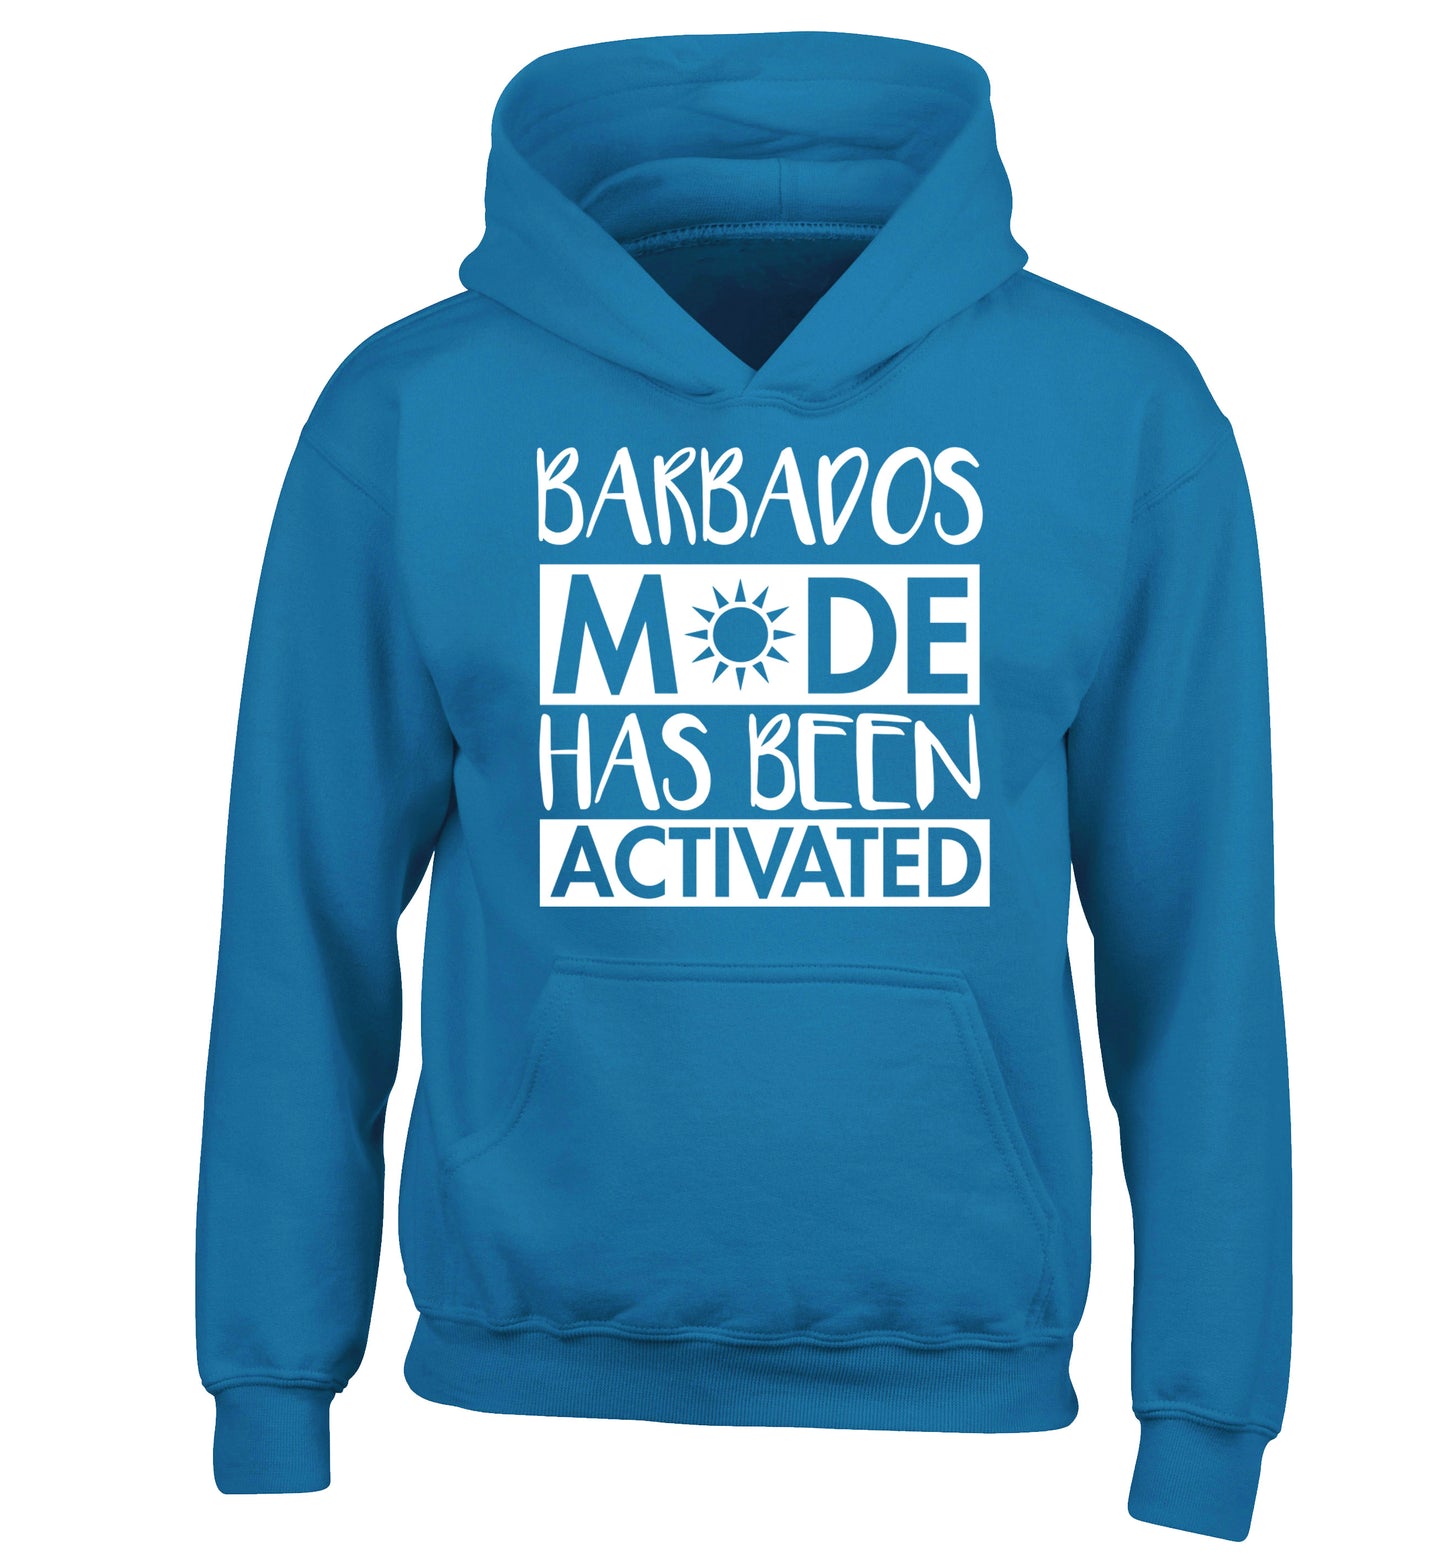 Barbados mode has been activated children's blue hoodie 12-13 Years